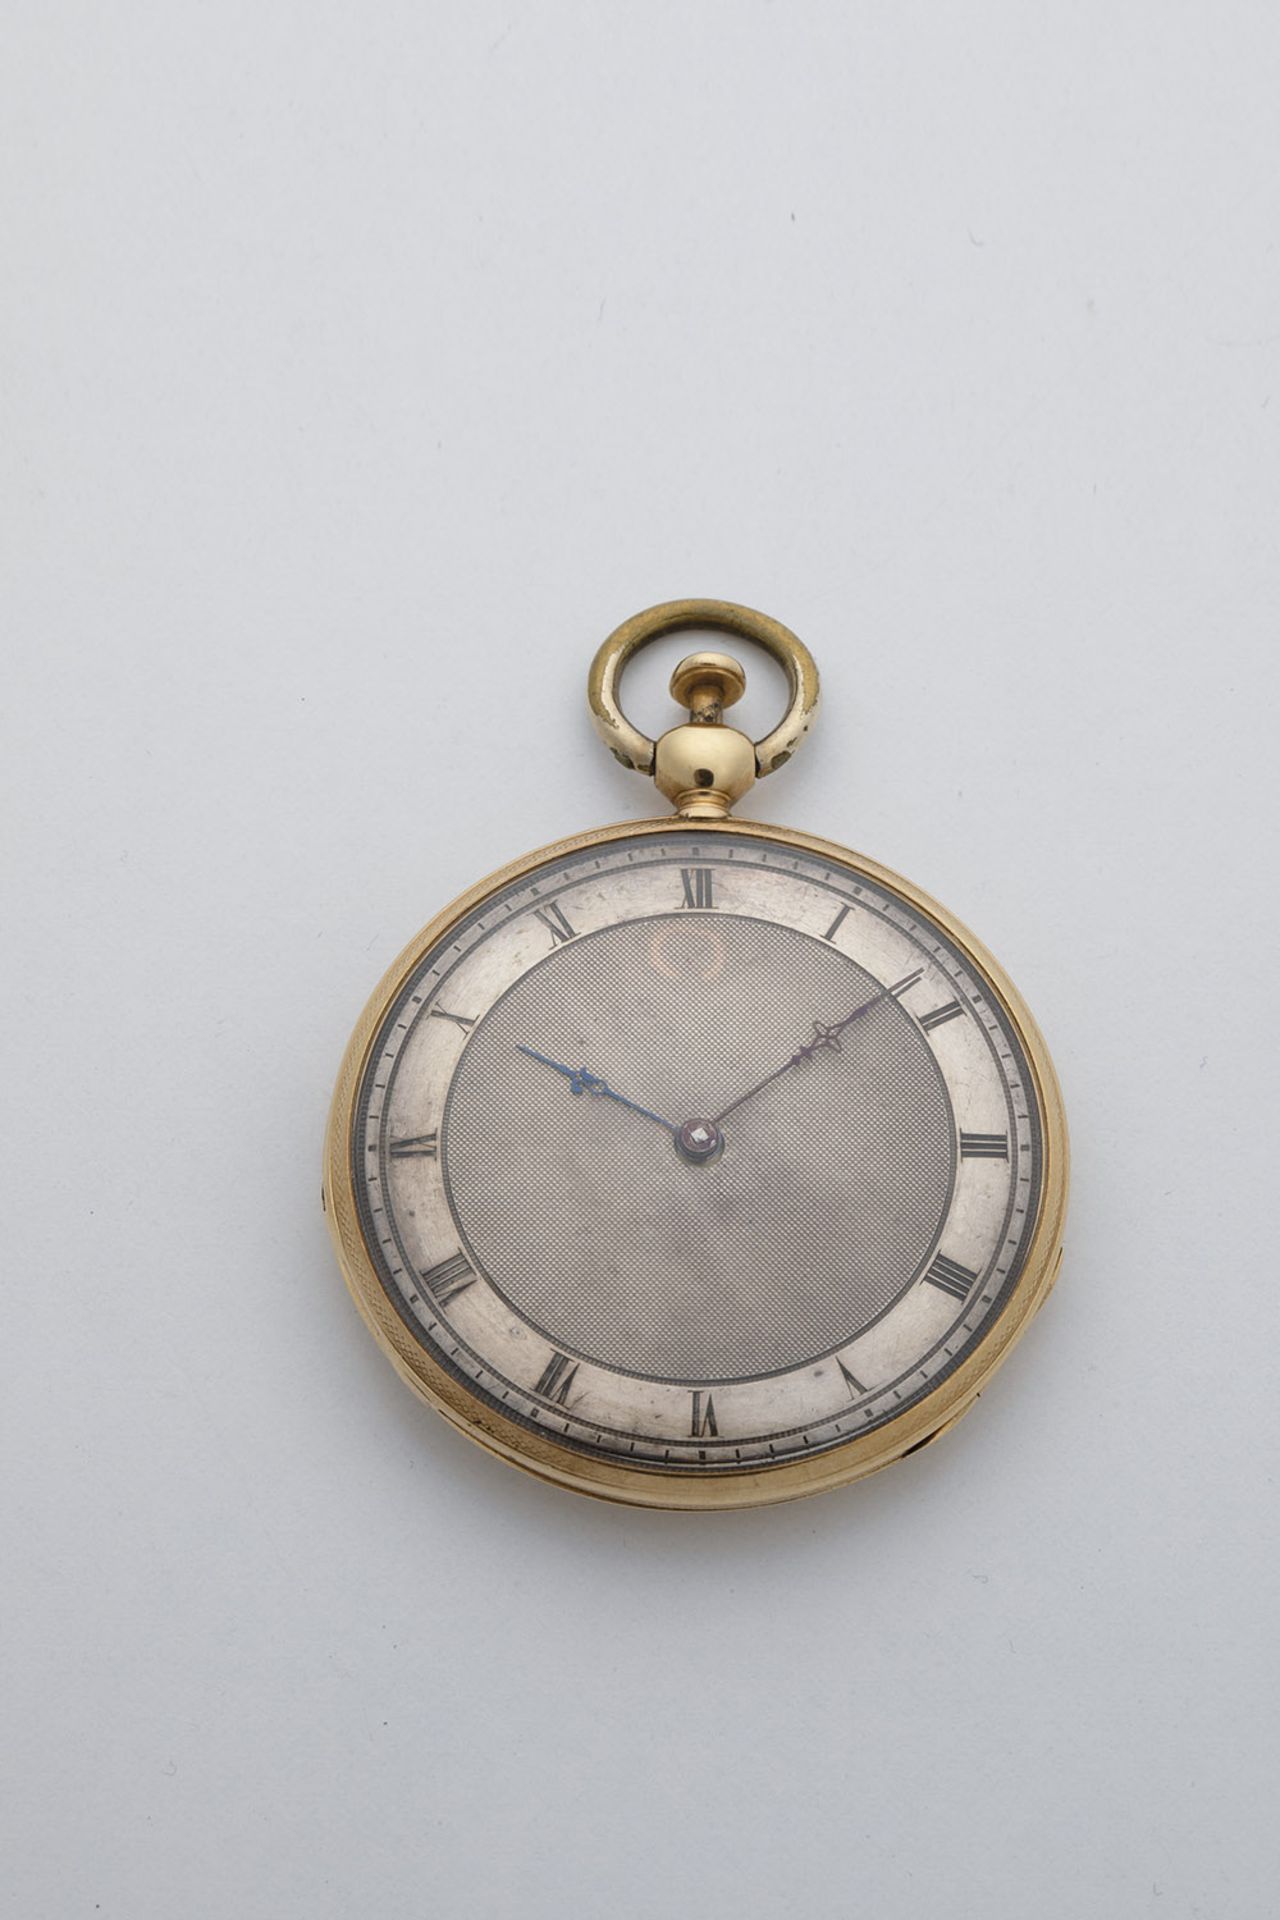 Pocket watch with 1/4 hour repeater